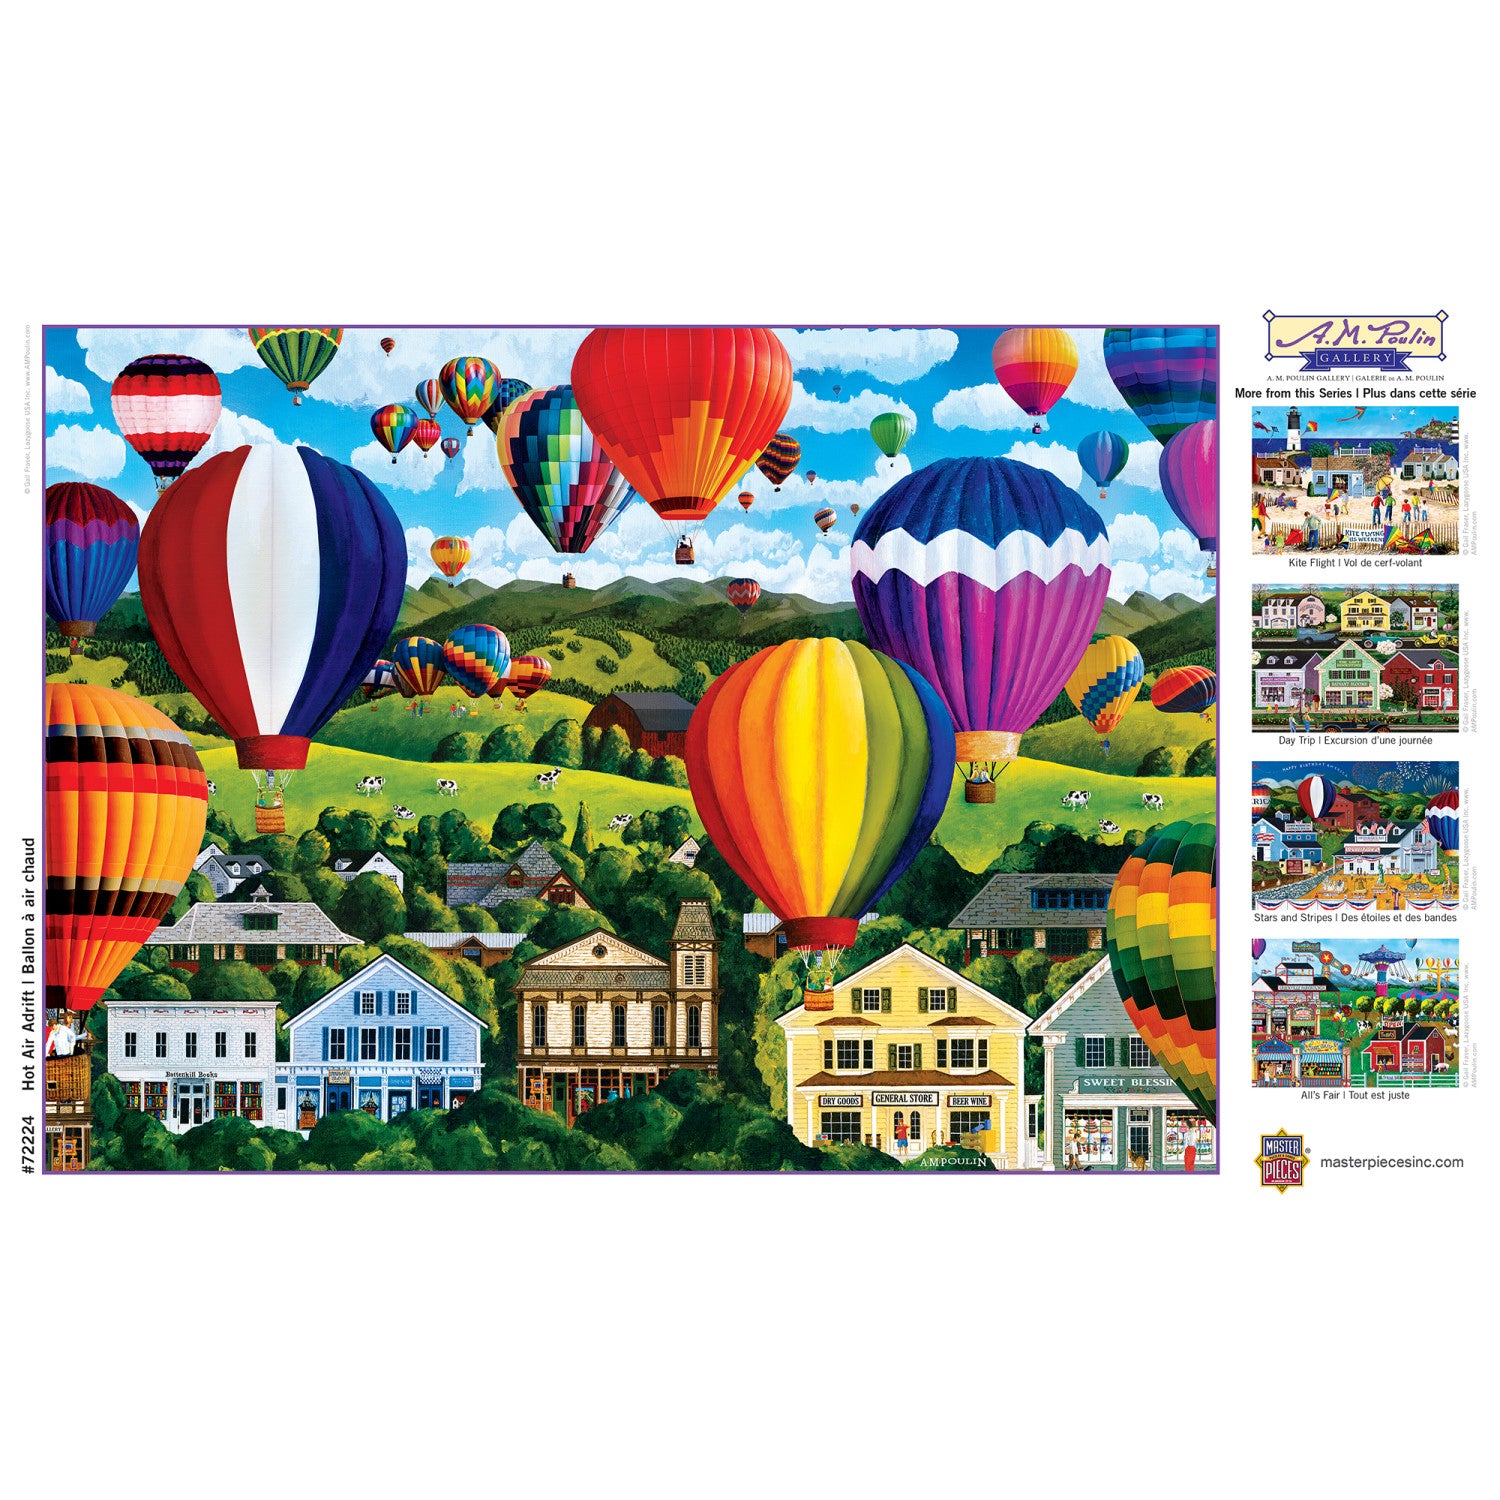 A.M. Poulin Gallery - Hot Air Adrift 1000 Piece Puzzle